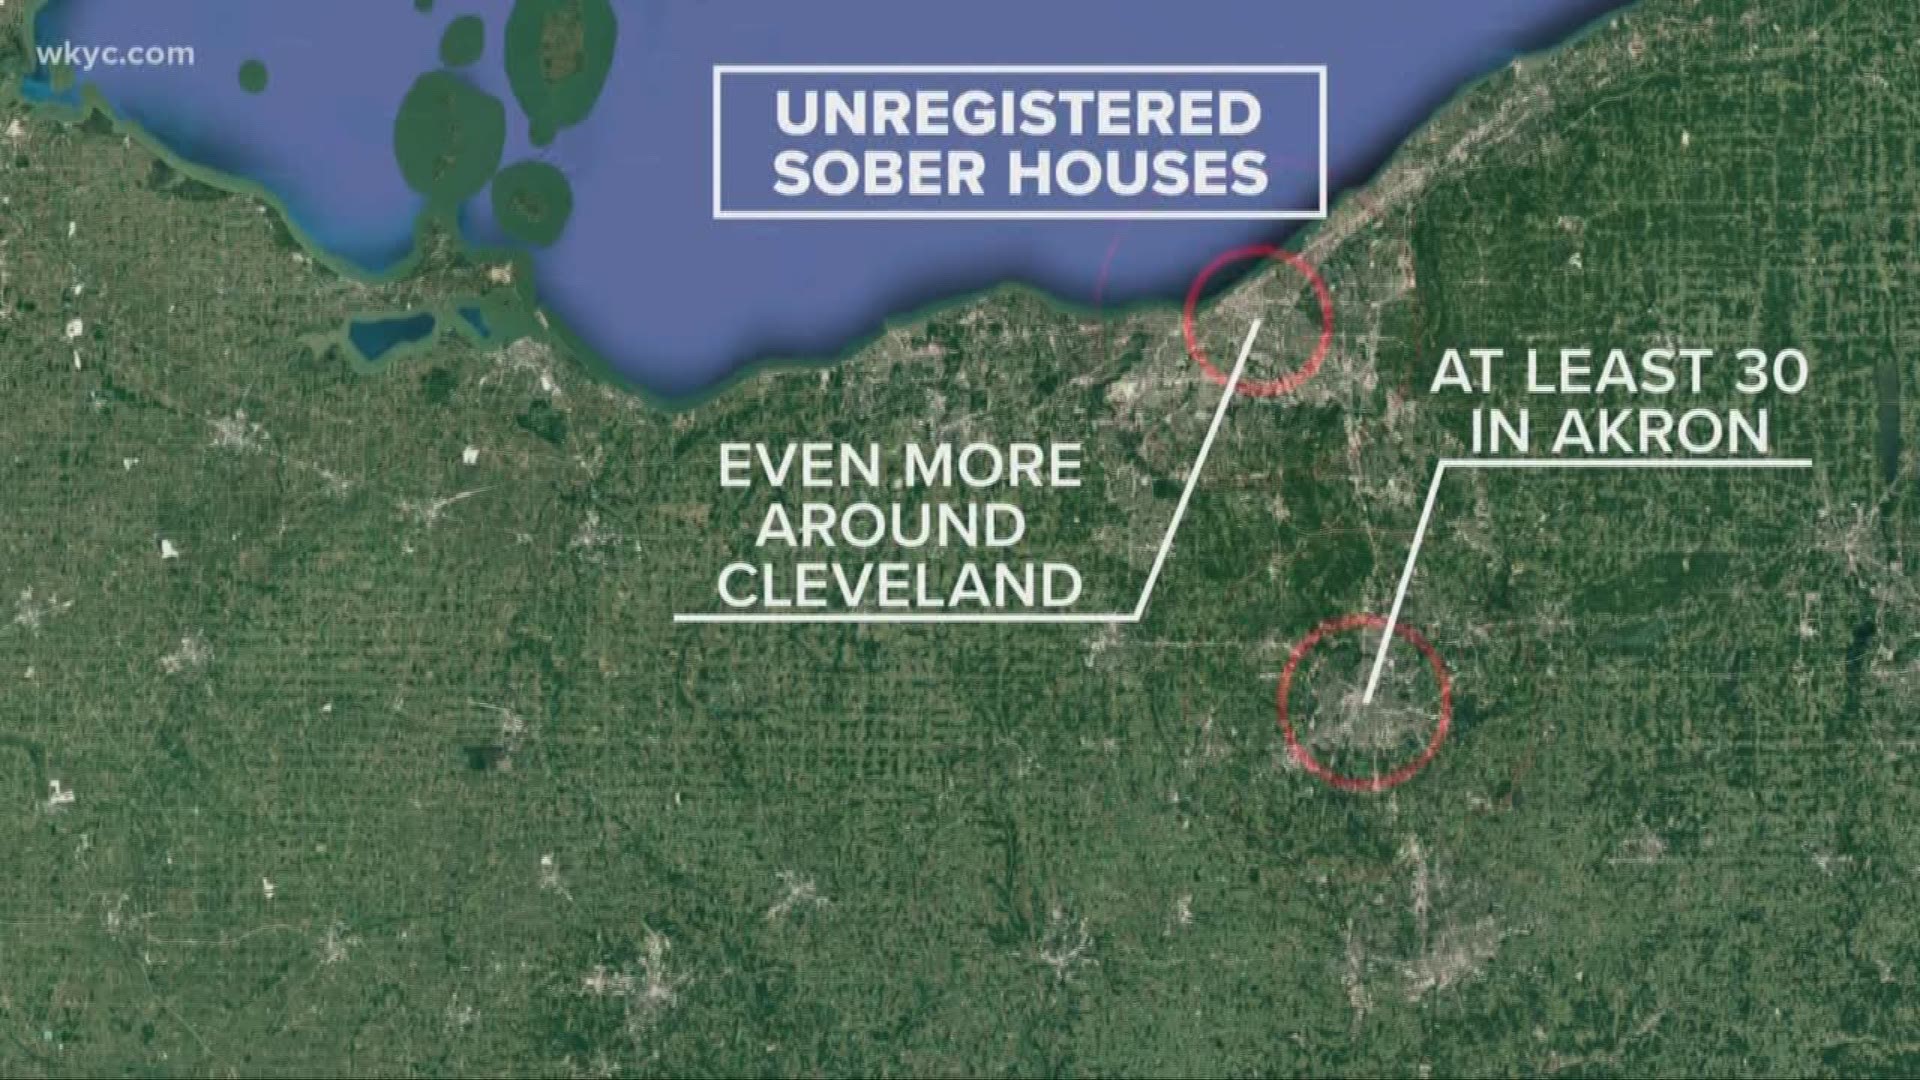 Critics call for change as some unregulated sober houses offer little counseling, big profits